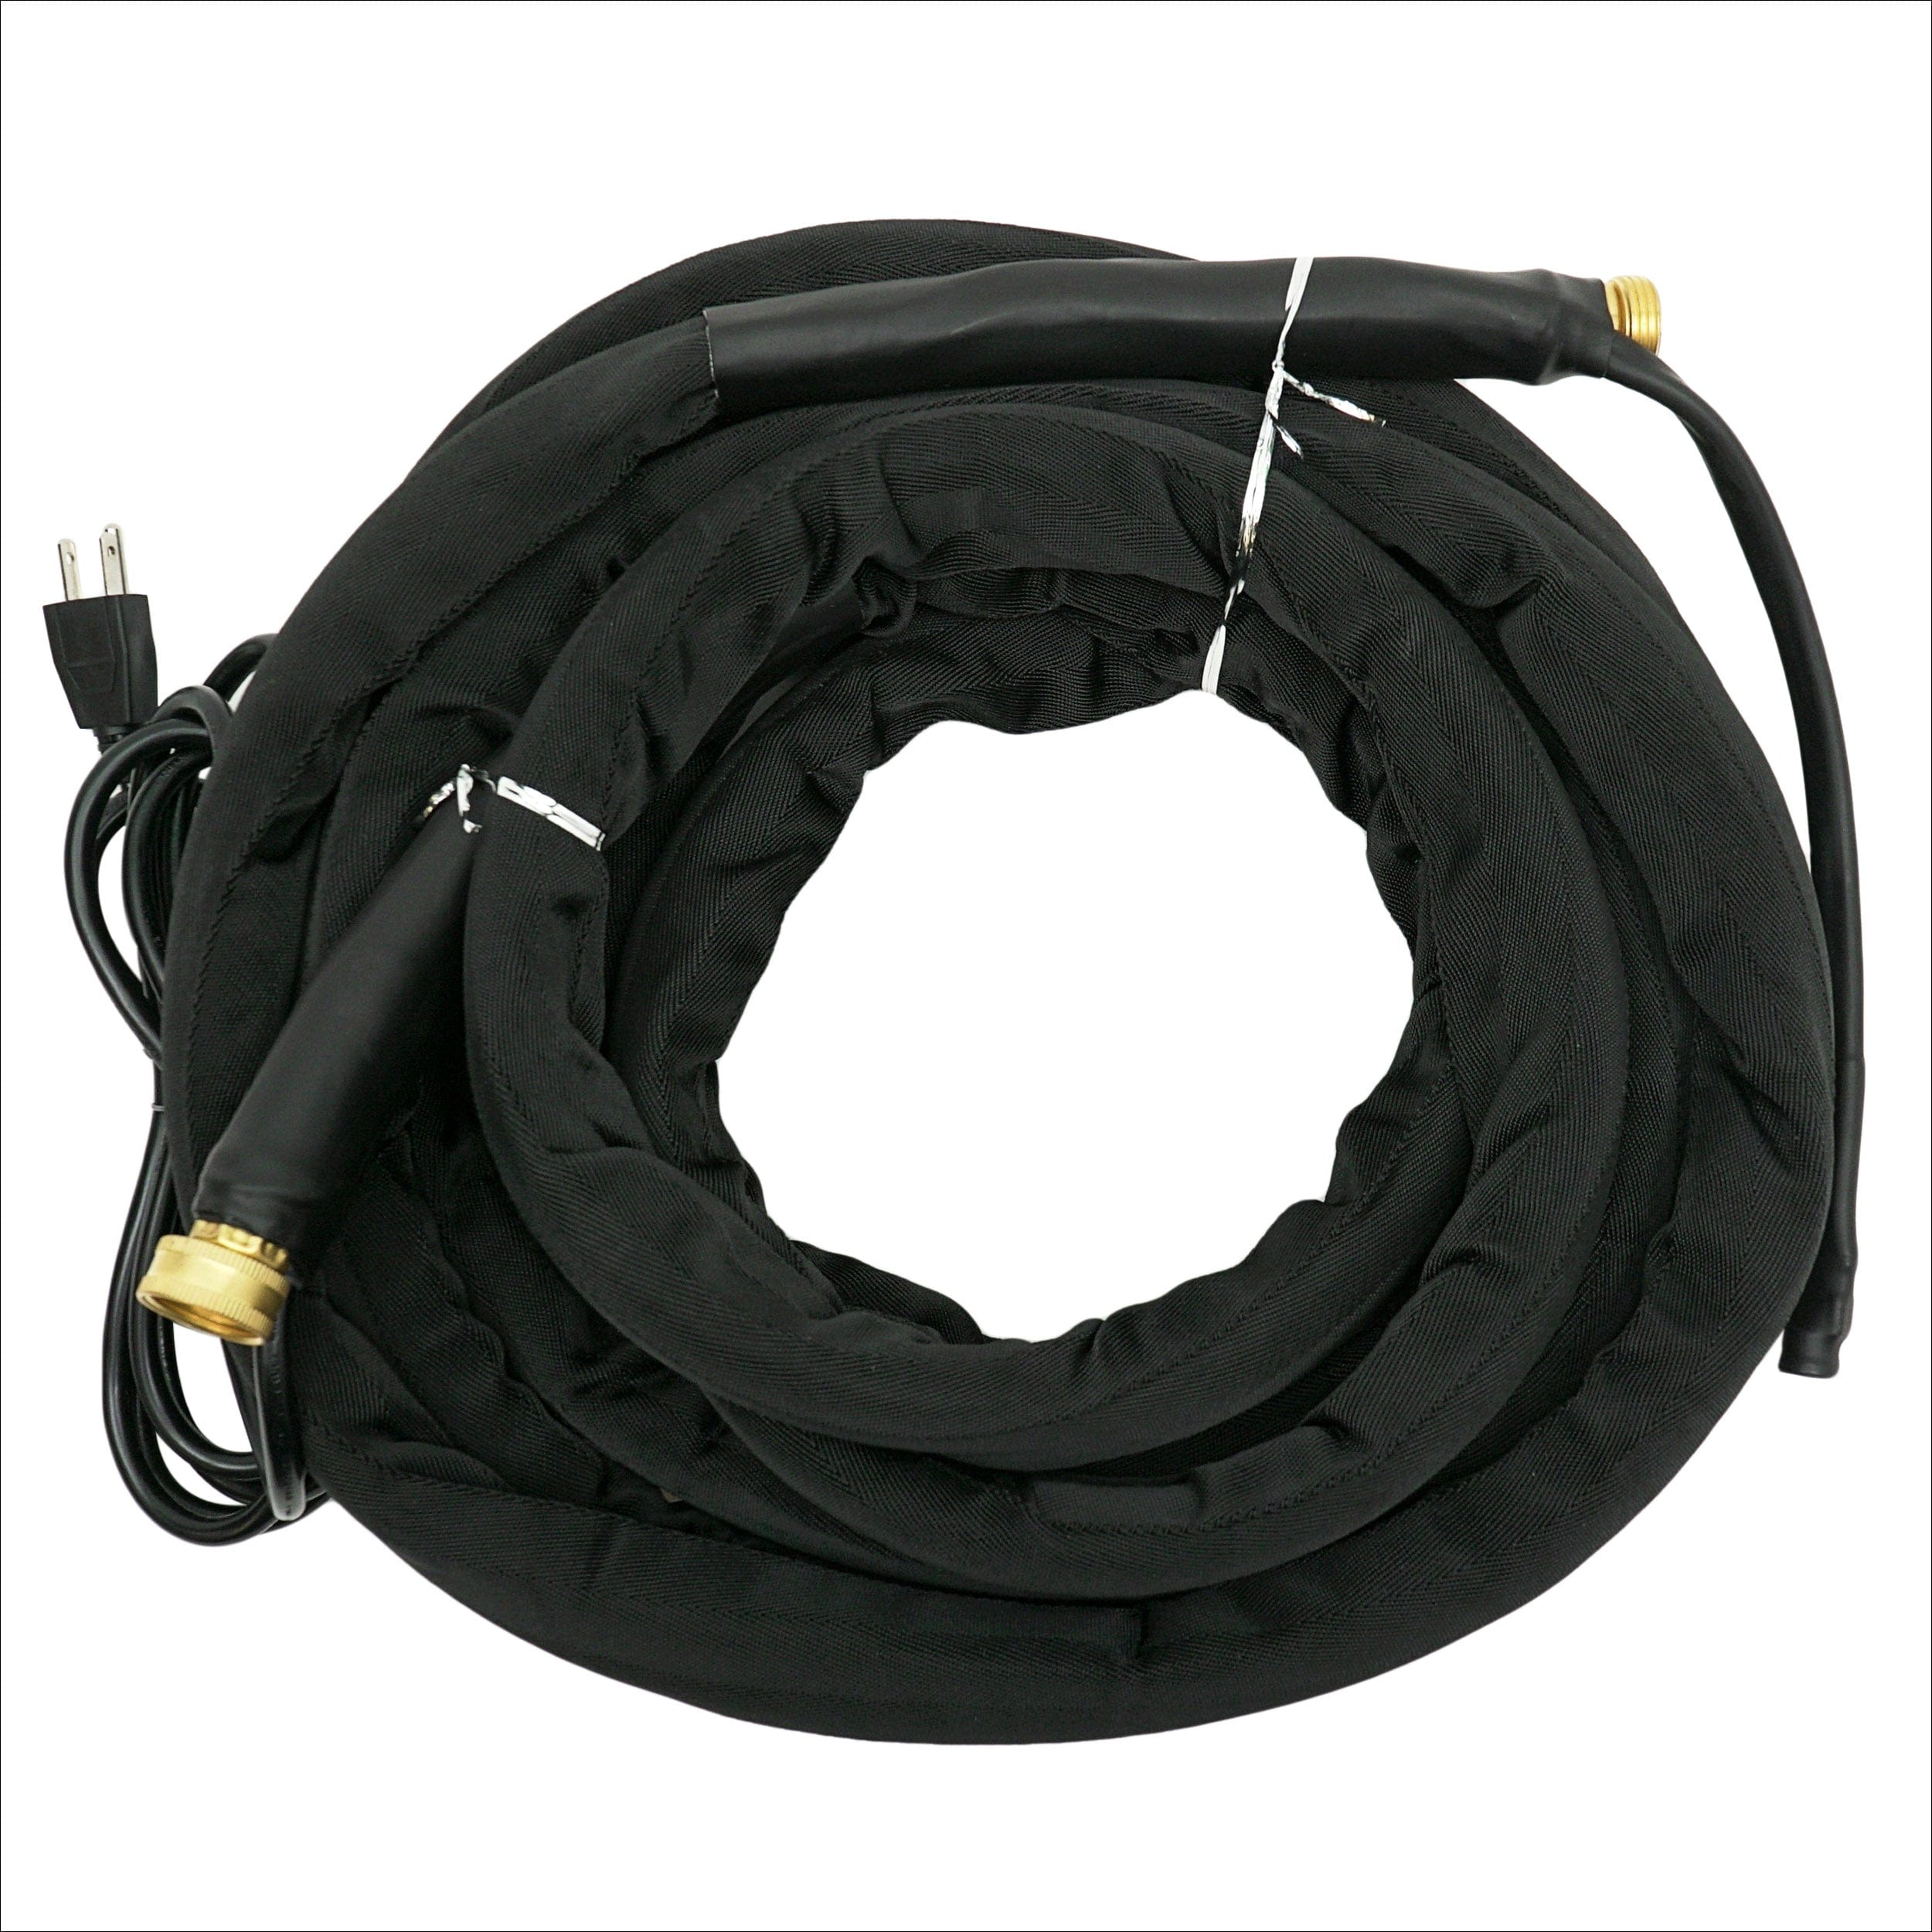 Able Motion RV Accessories Sylvan Heated Water Hose for Outdoor Use Campsites RV Self-Regulating 25 ft